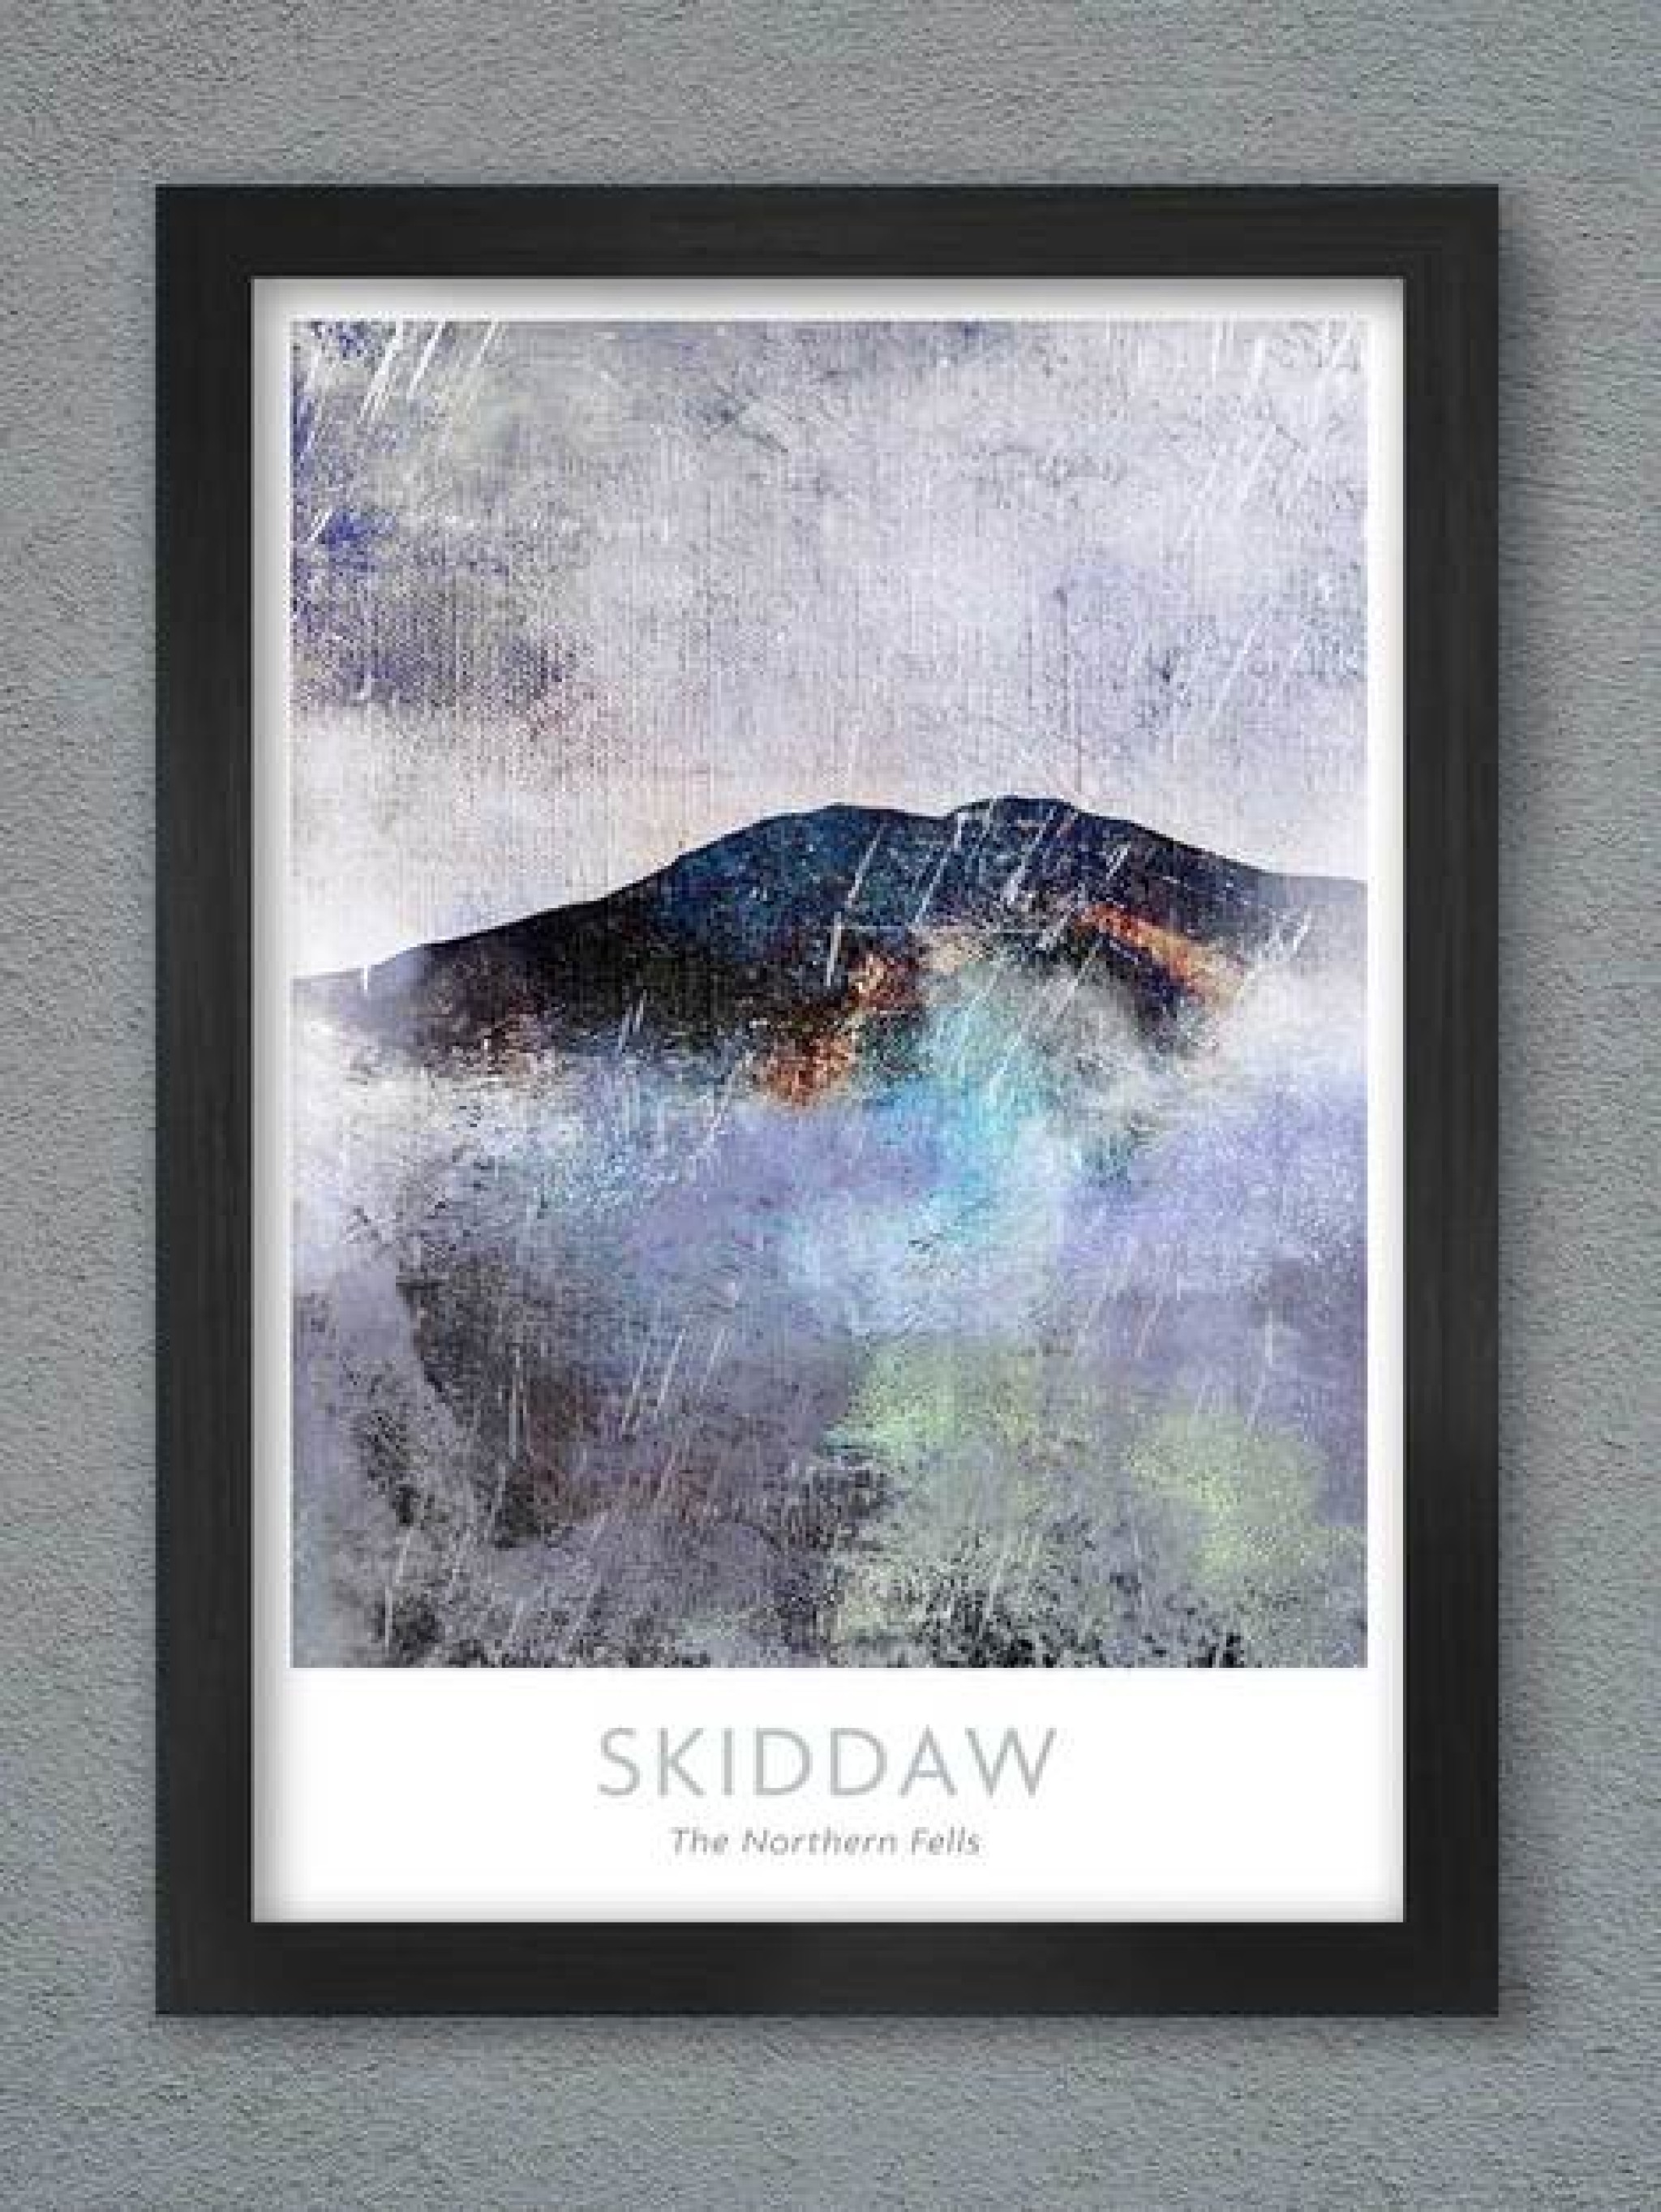 skiddaw-abstract-poster-print-posters-the-northern-line-726640_470x.jpg